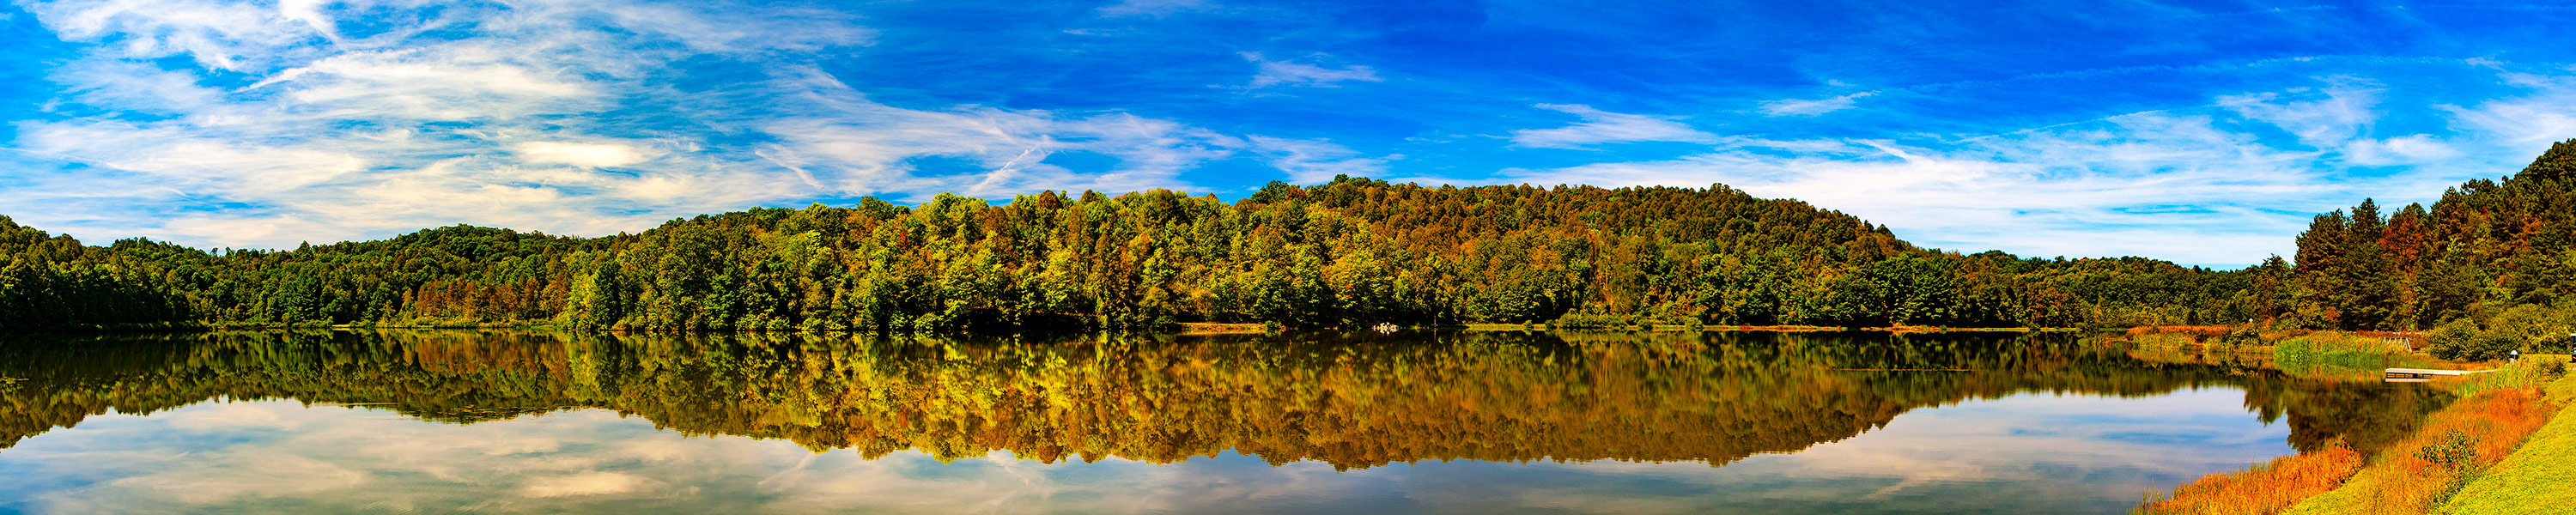 Big Ditch Wildlife Management Area Near Cowen WV  - Panorama Photography By Sean Rose